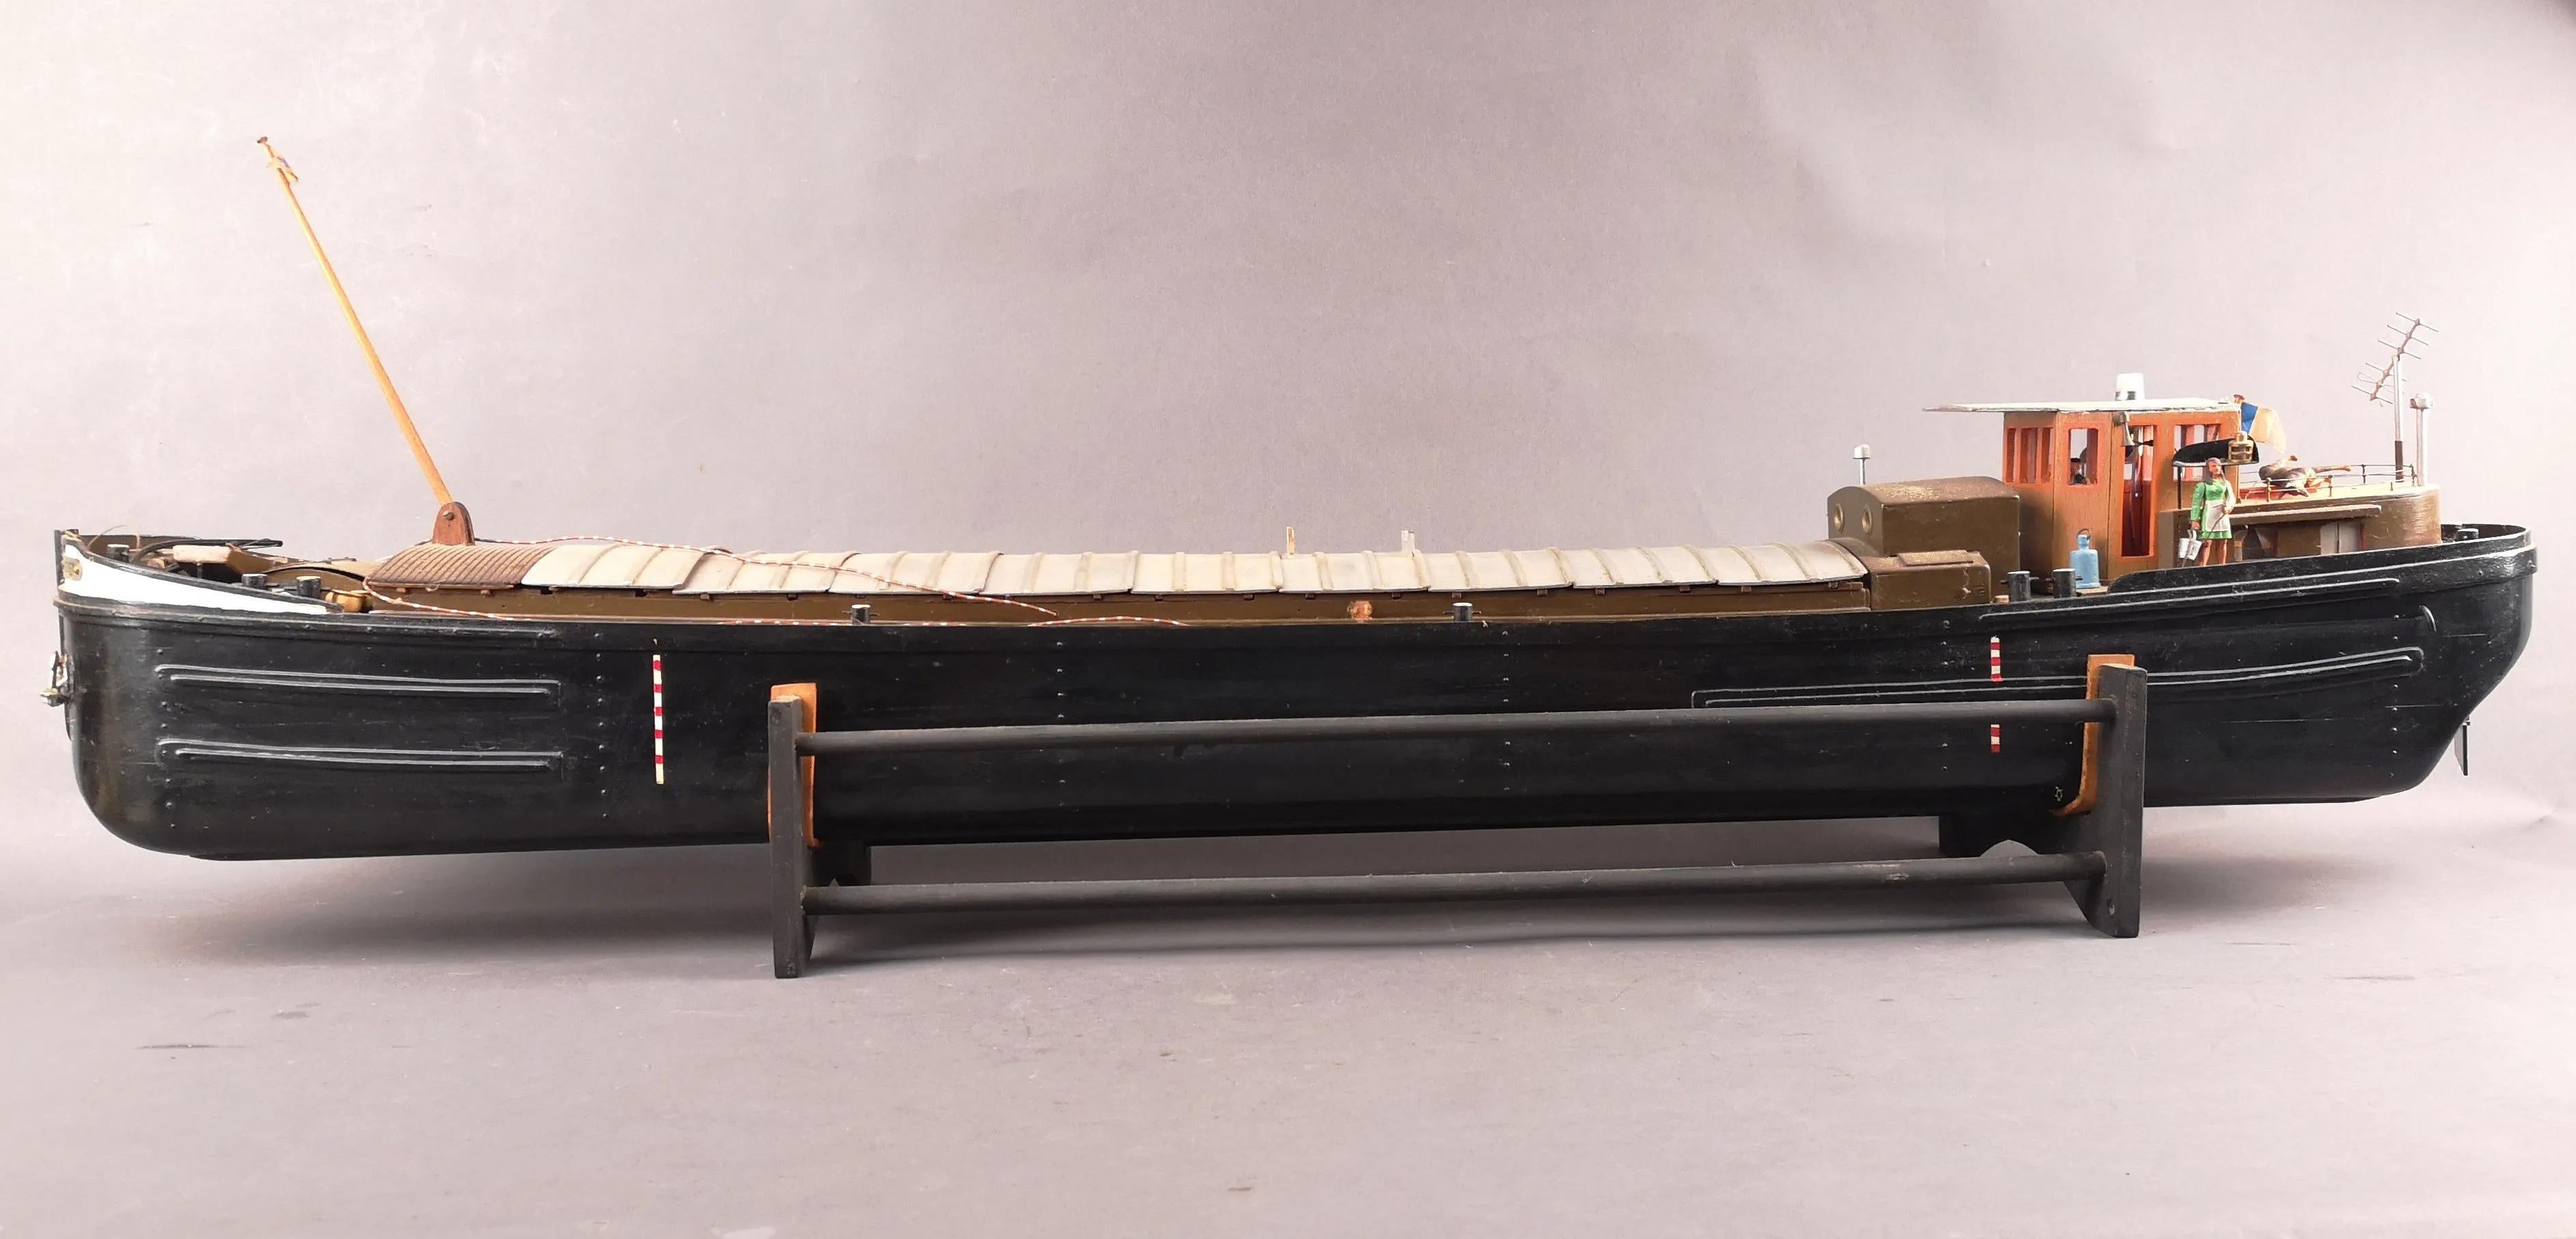 Rare large barge model, in wood and composite material circa 1960 
with battery and sound system to be checked.